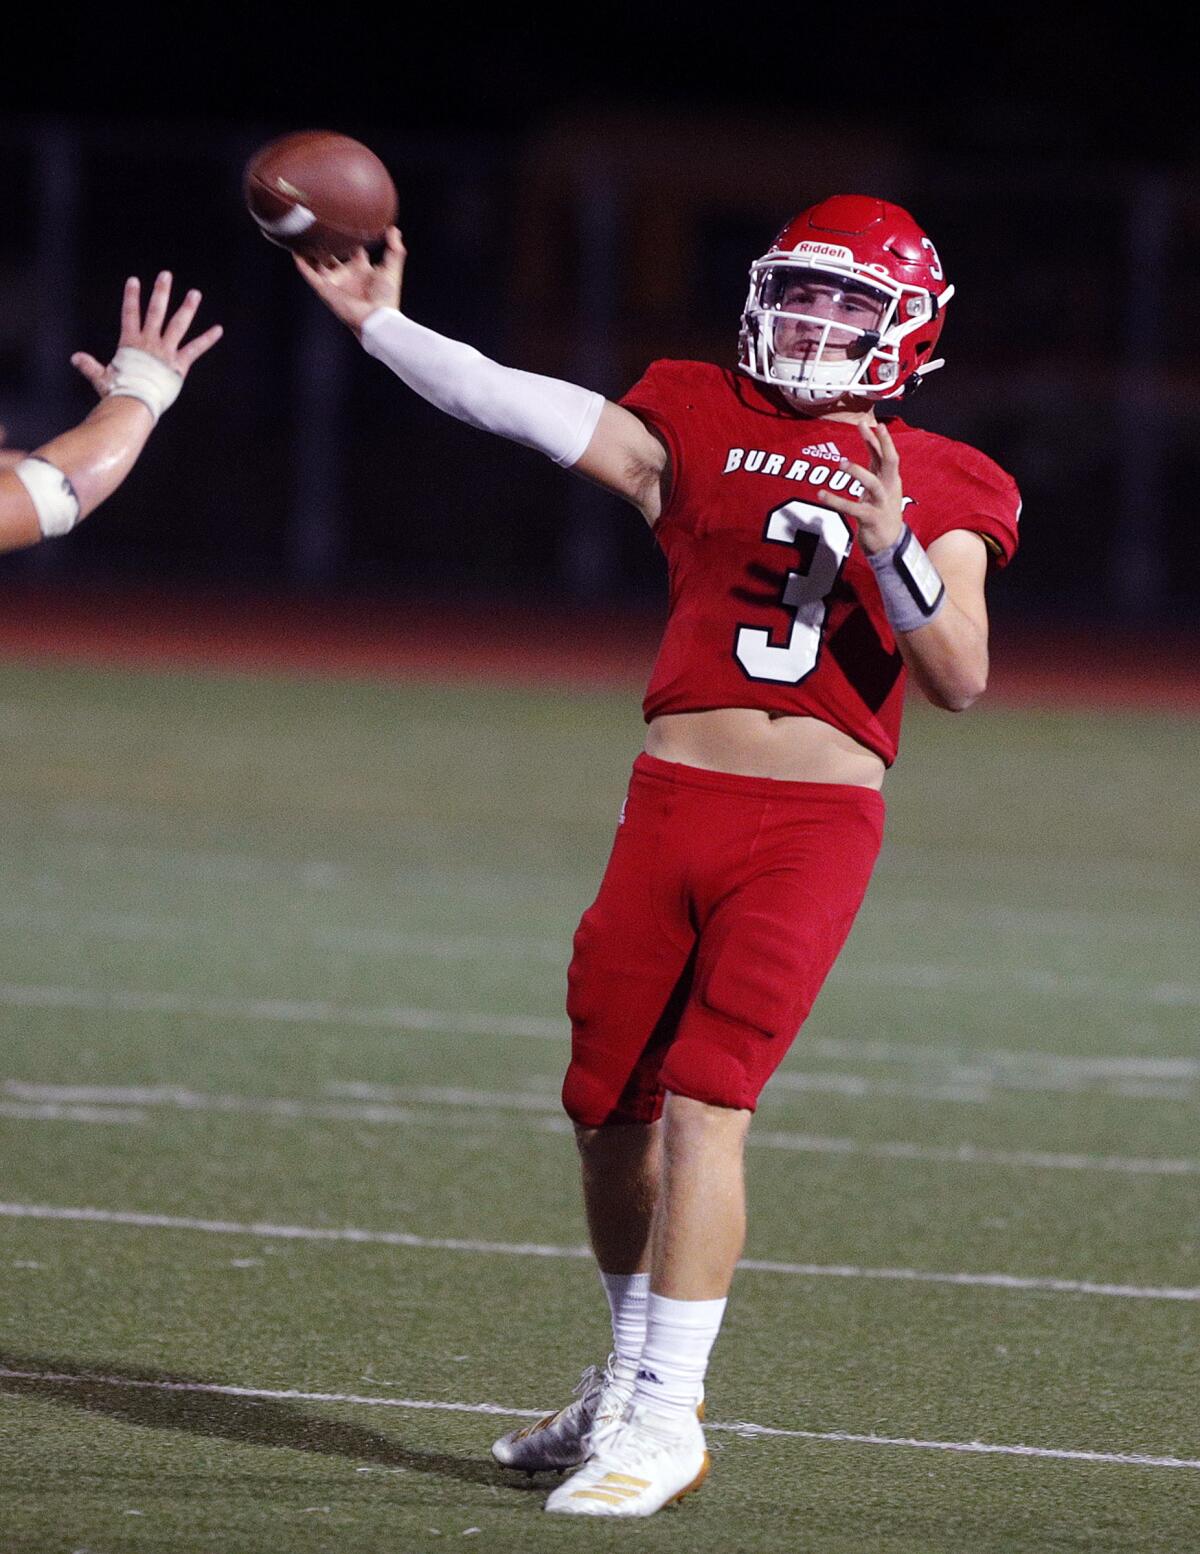 Nick Garcia and the Burroughs High football team will take on Pasadena in a Pacific League game at 7 p.m. Friday at Memorial Field.